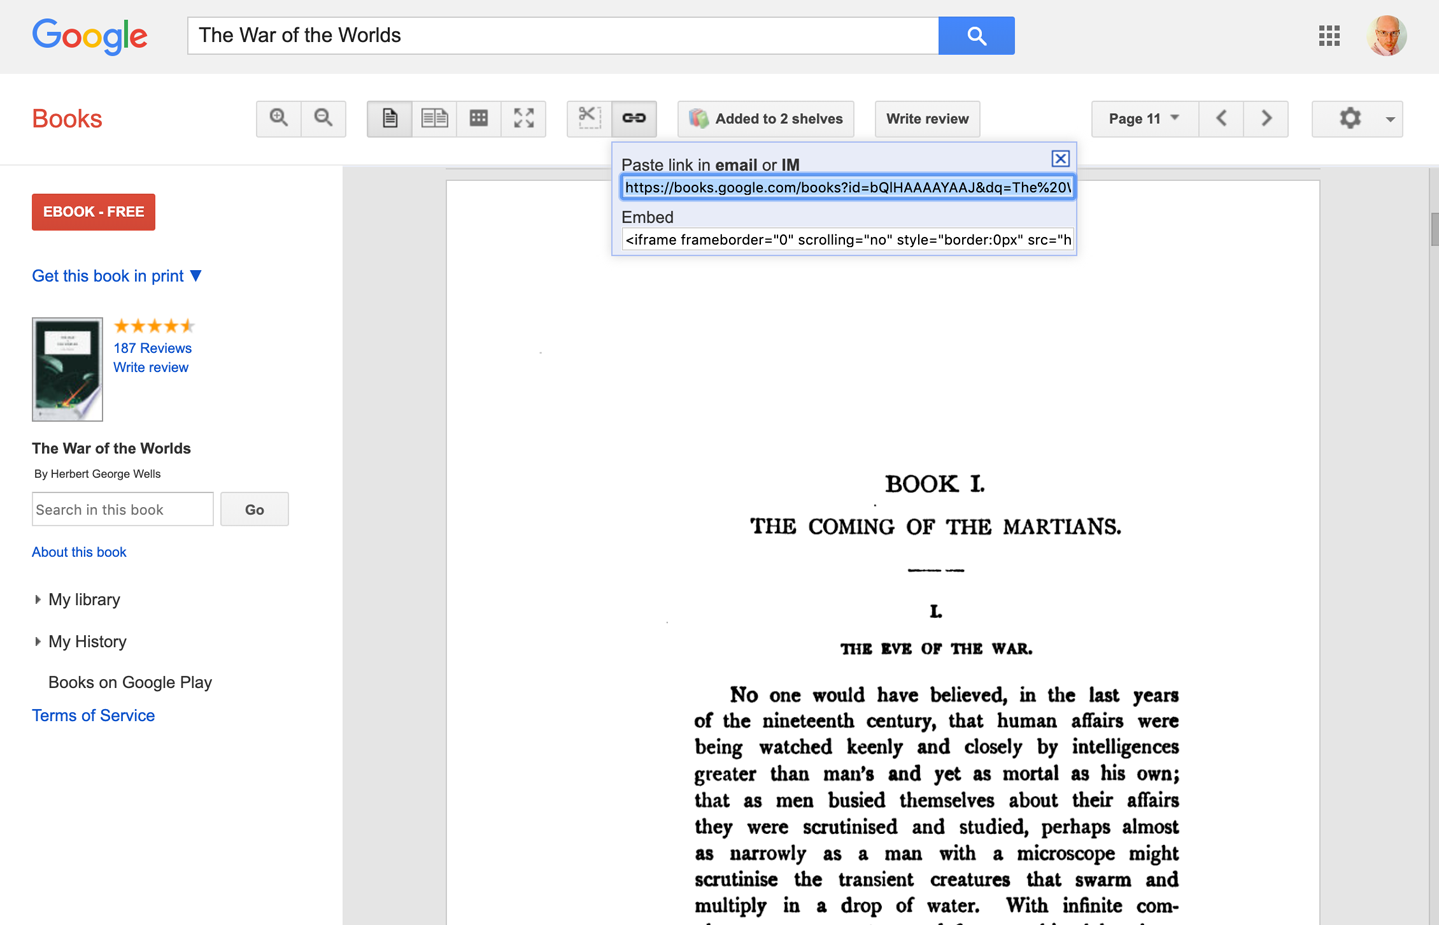 Deep-linked state in Google Books, found in two places: the browser’s URL field, and the “Link” feature